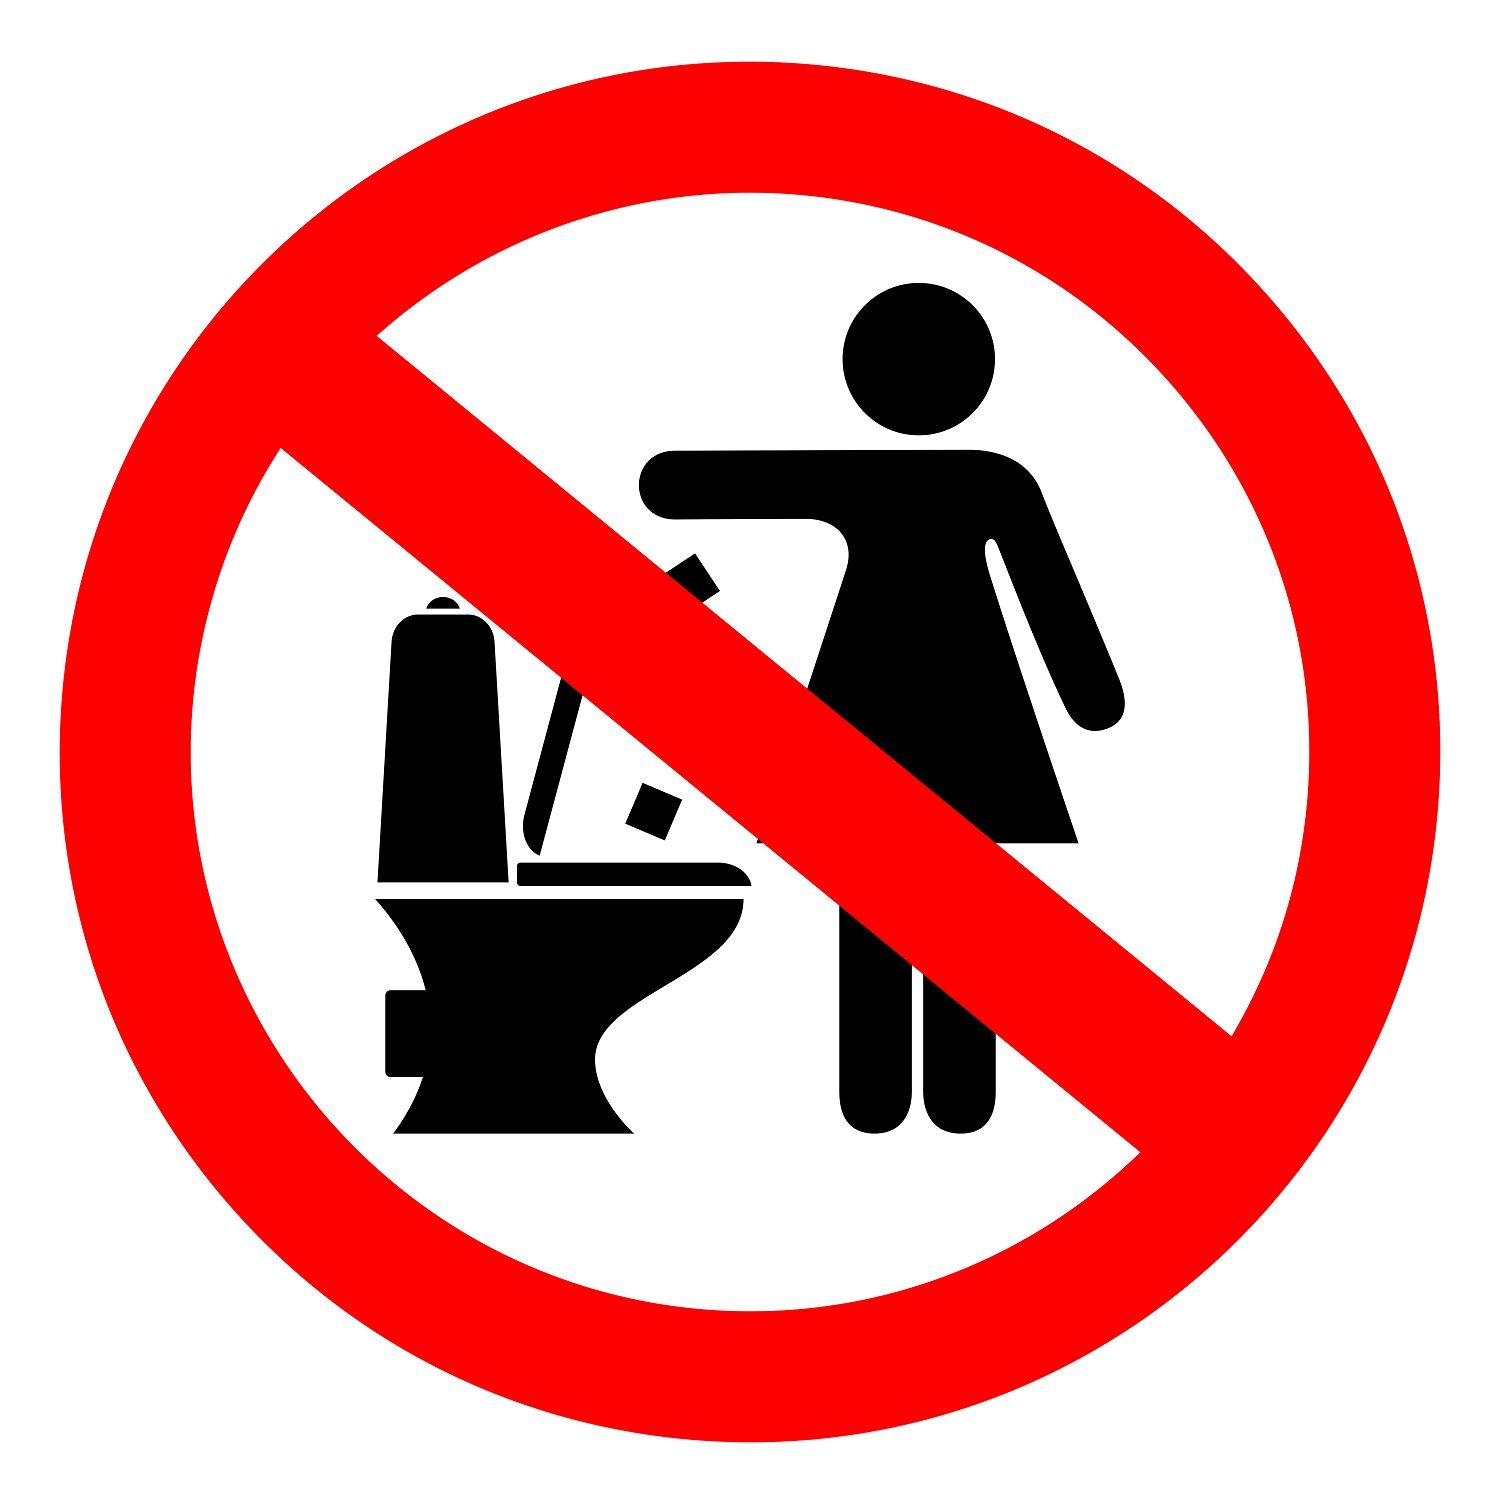 Why is flushing sanitary down the toilet bad our sewers and oceans?